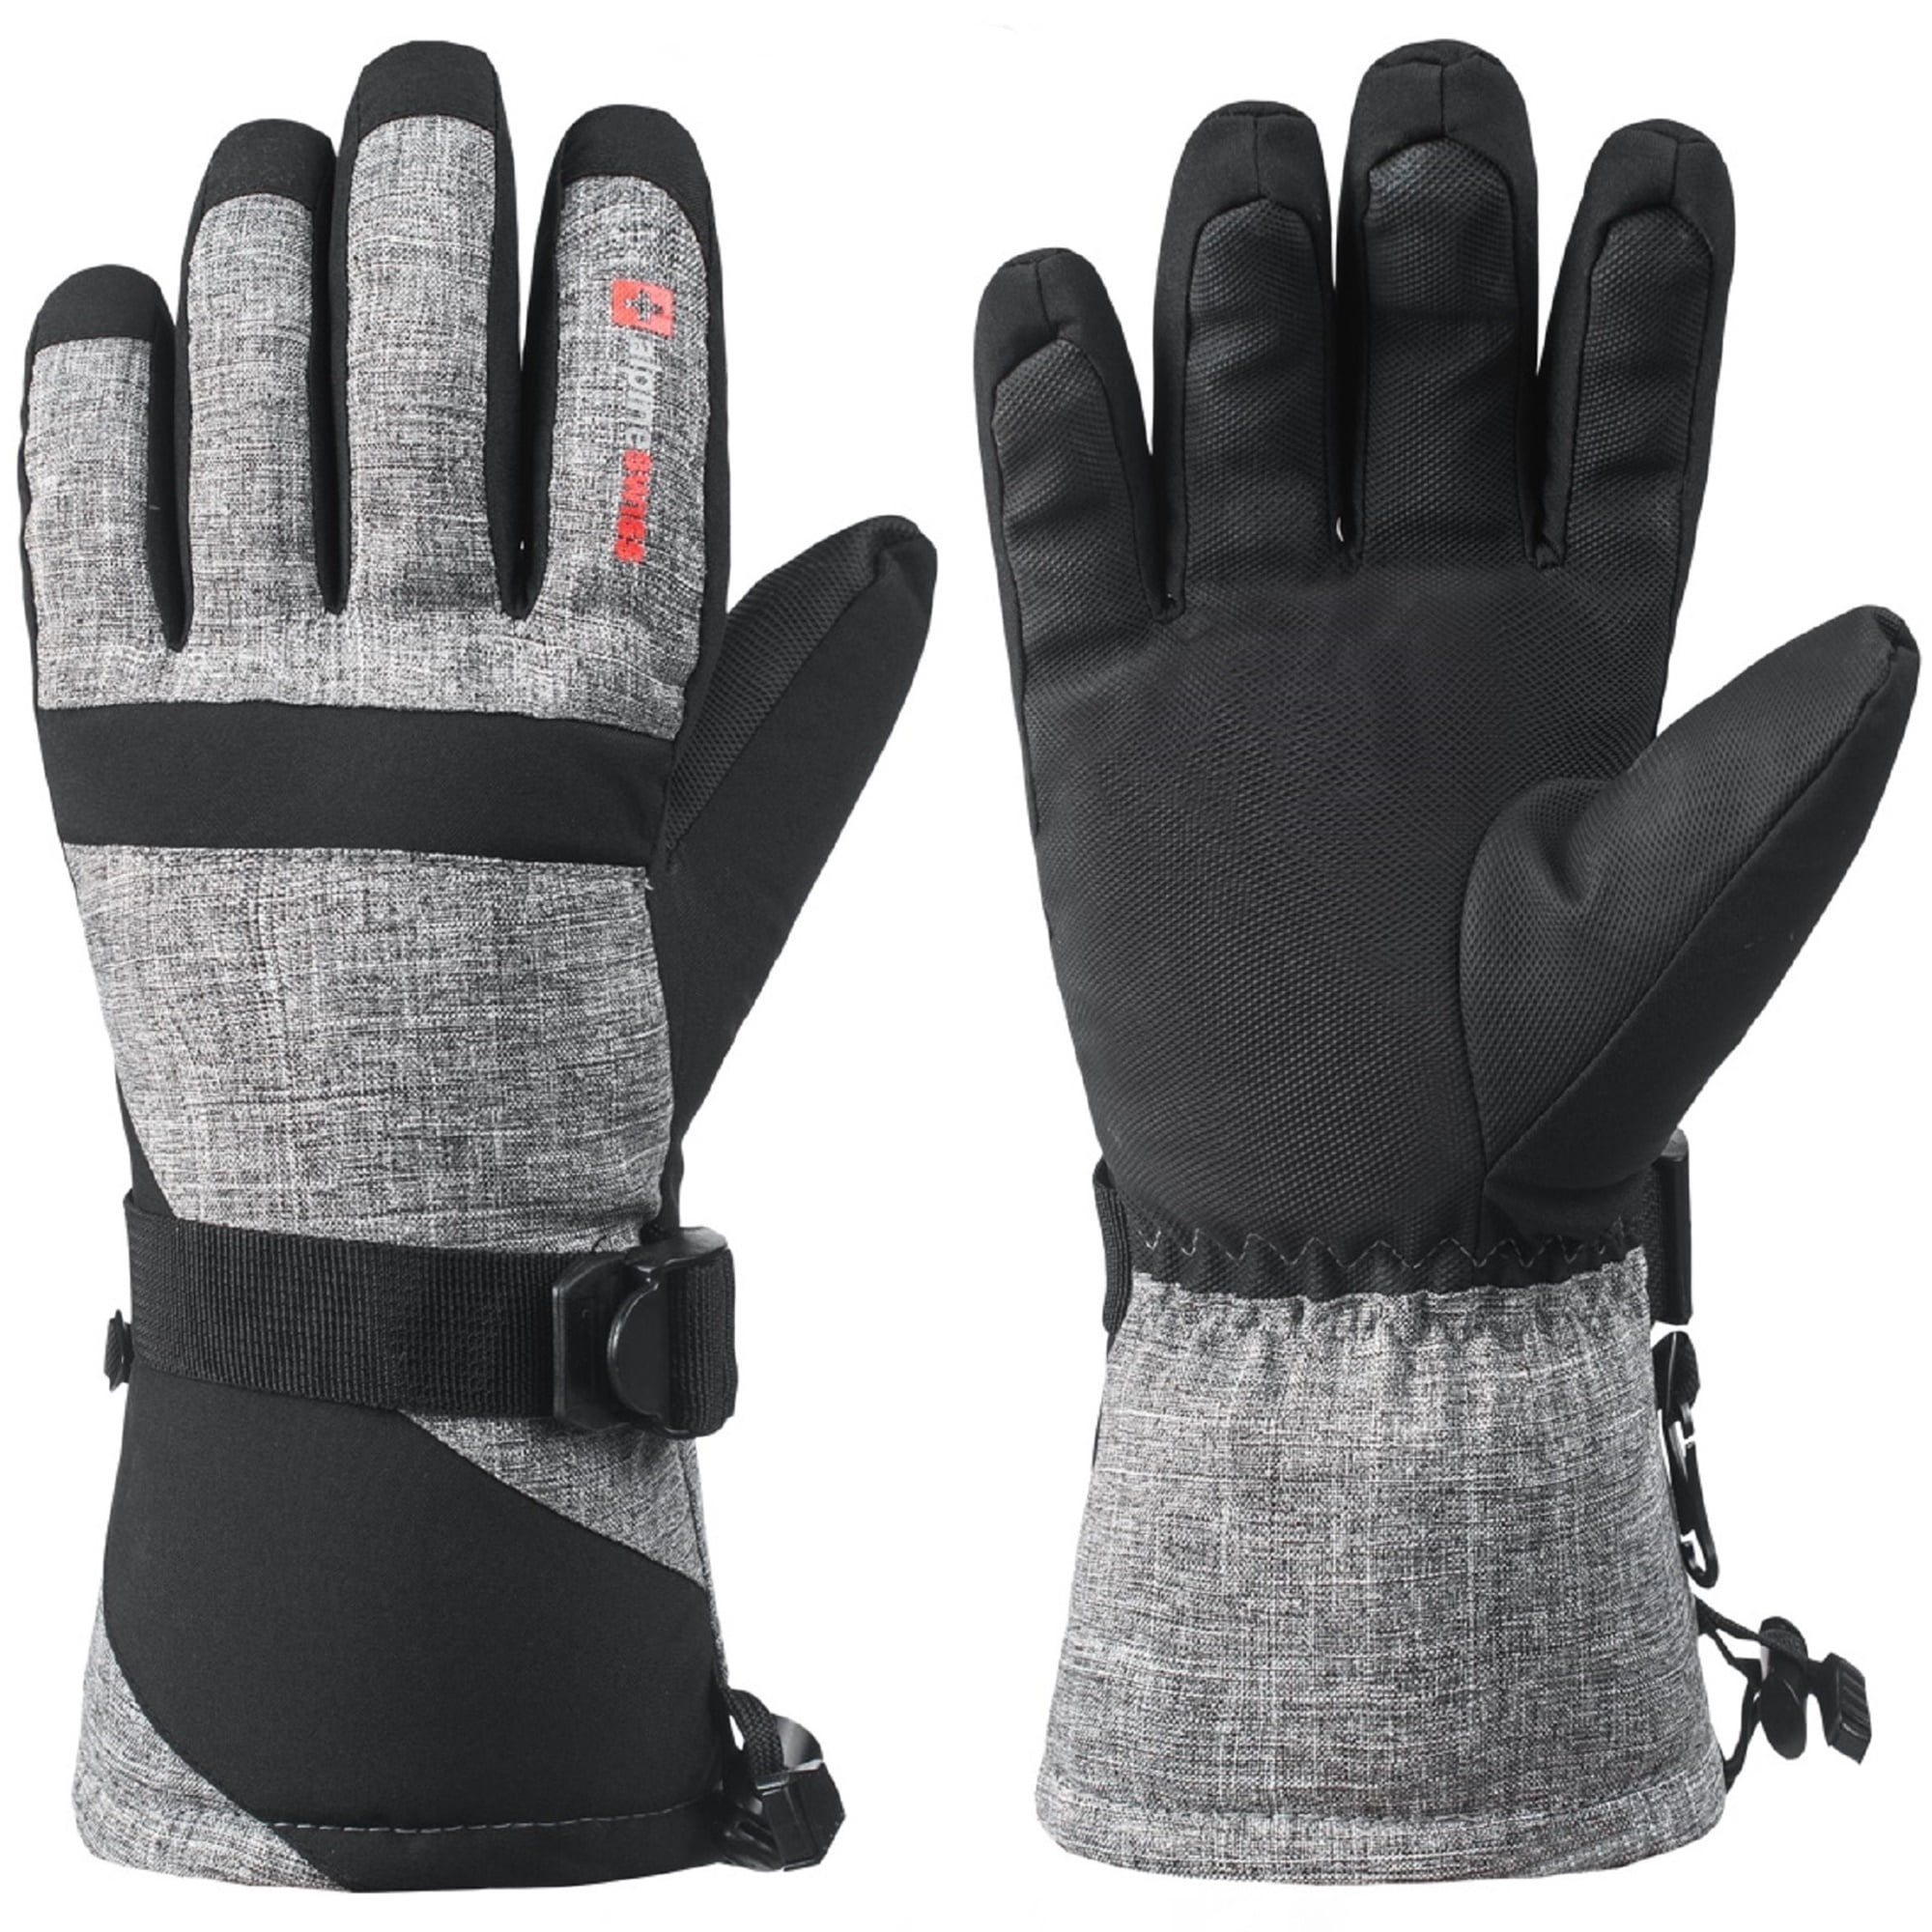 Waterproof Ski Gloves for Men with 3M Thinsulate Warm Winter Gloves Adults Teens 